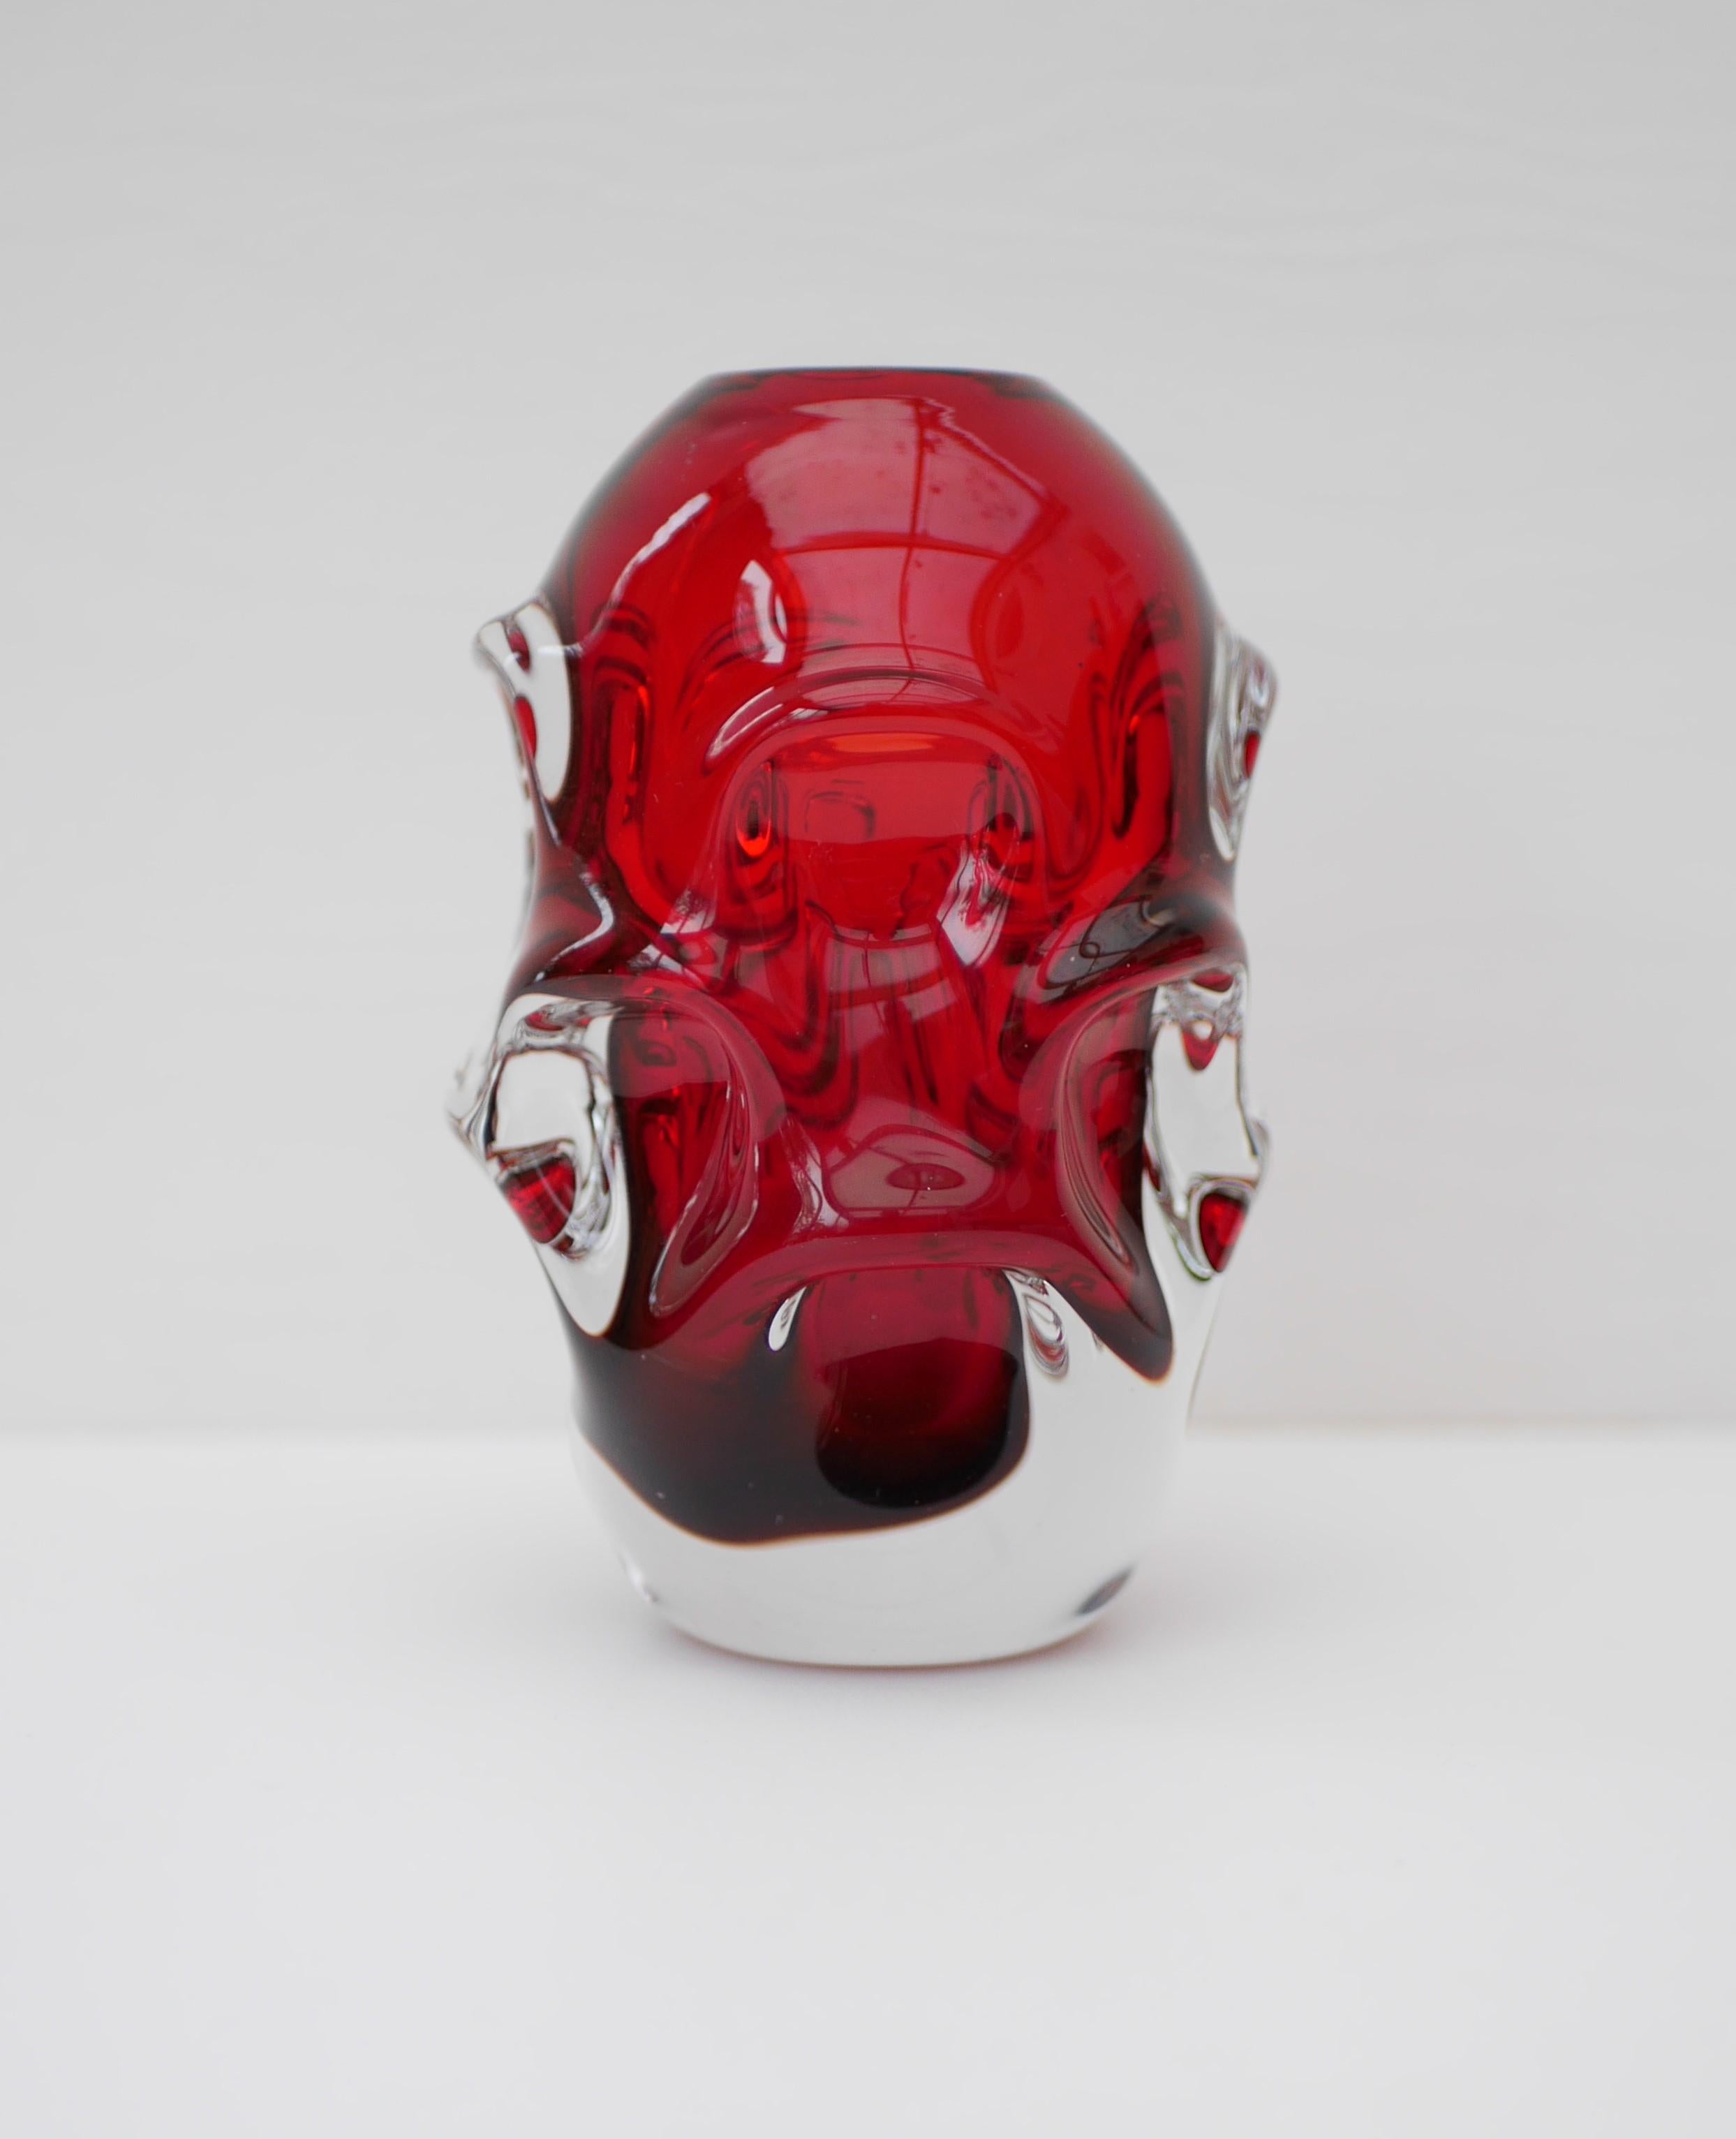 A stunning red glass vase by Börne Augustsson för Åseda Glassworks, Sweden. Unsigned from the 1950s. A stunning modernist piece, this is very much a statement glass vase.

Åseda was formed on 29 June 1946 and registered as Åseda Glasbruks AB on 14